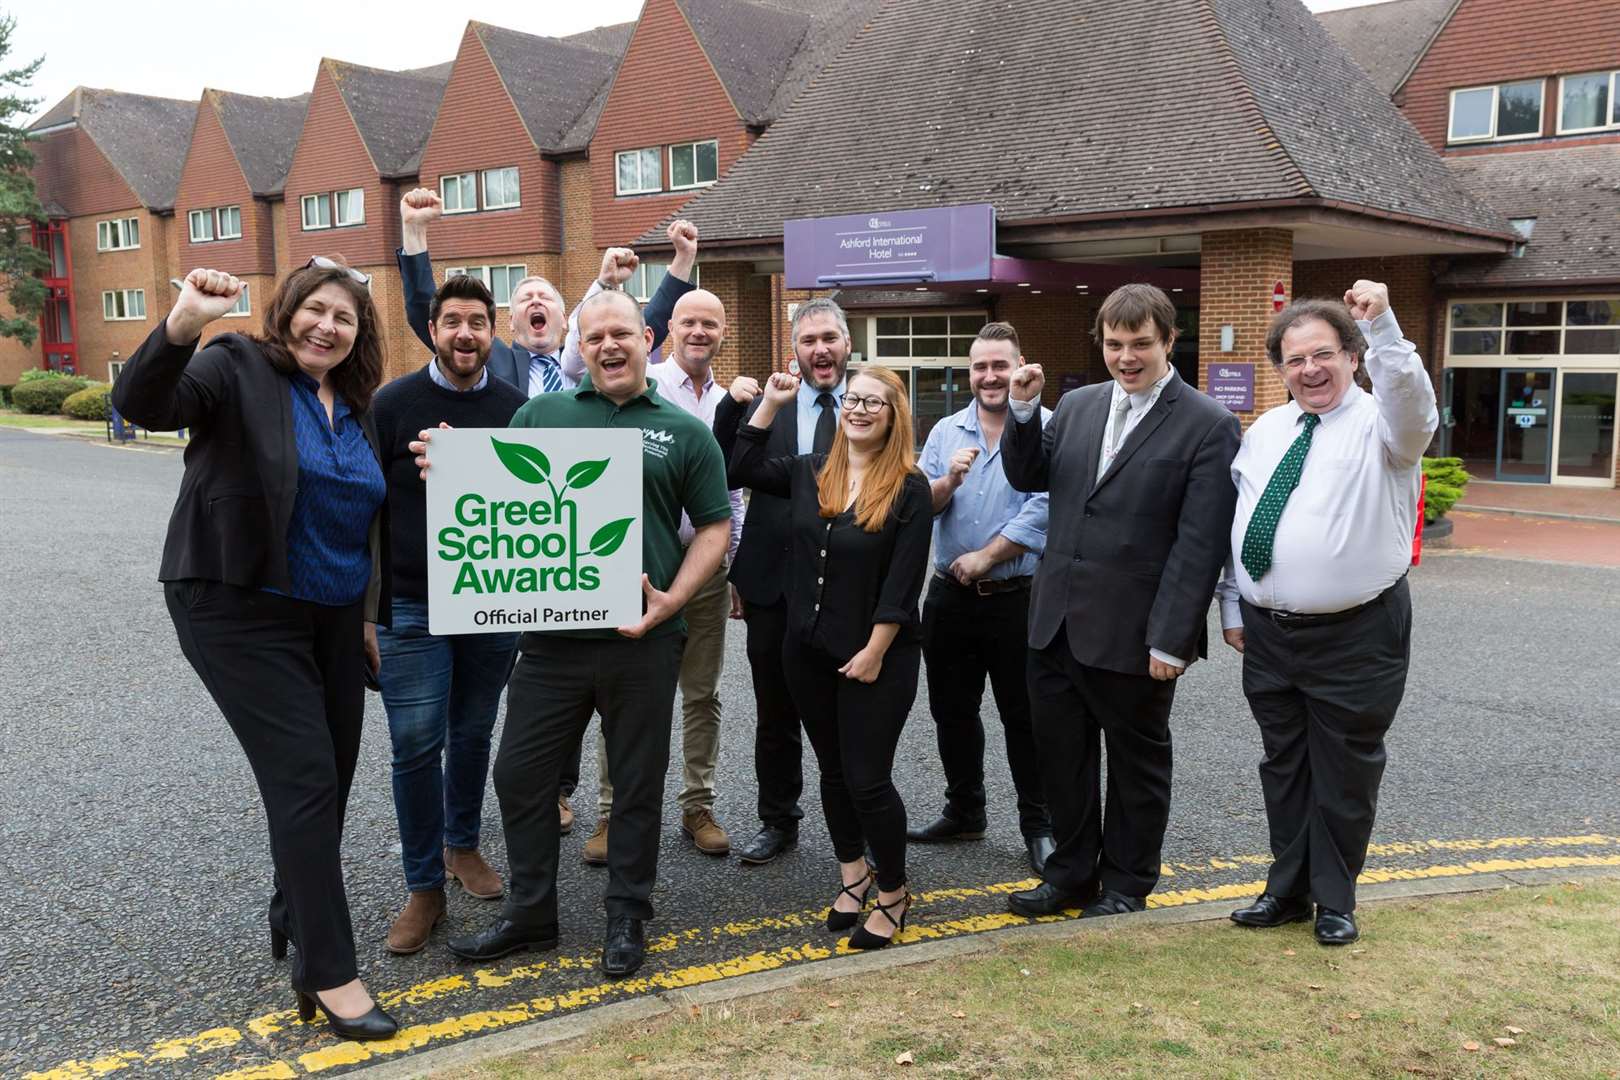 Organisations backing the Green School Awards 2020 gathered for the official launch at the Ashford International Hotel.